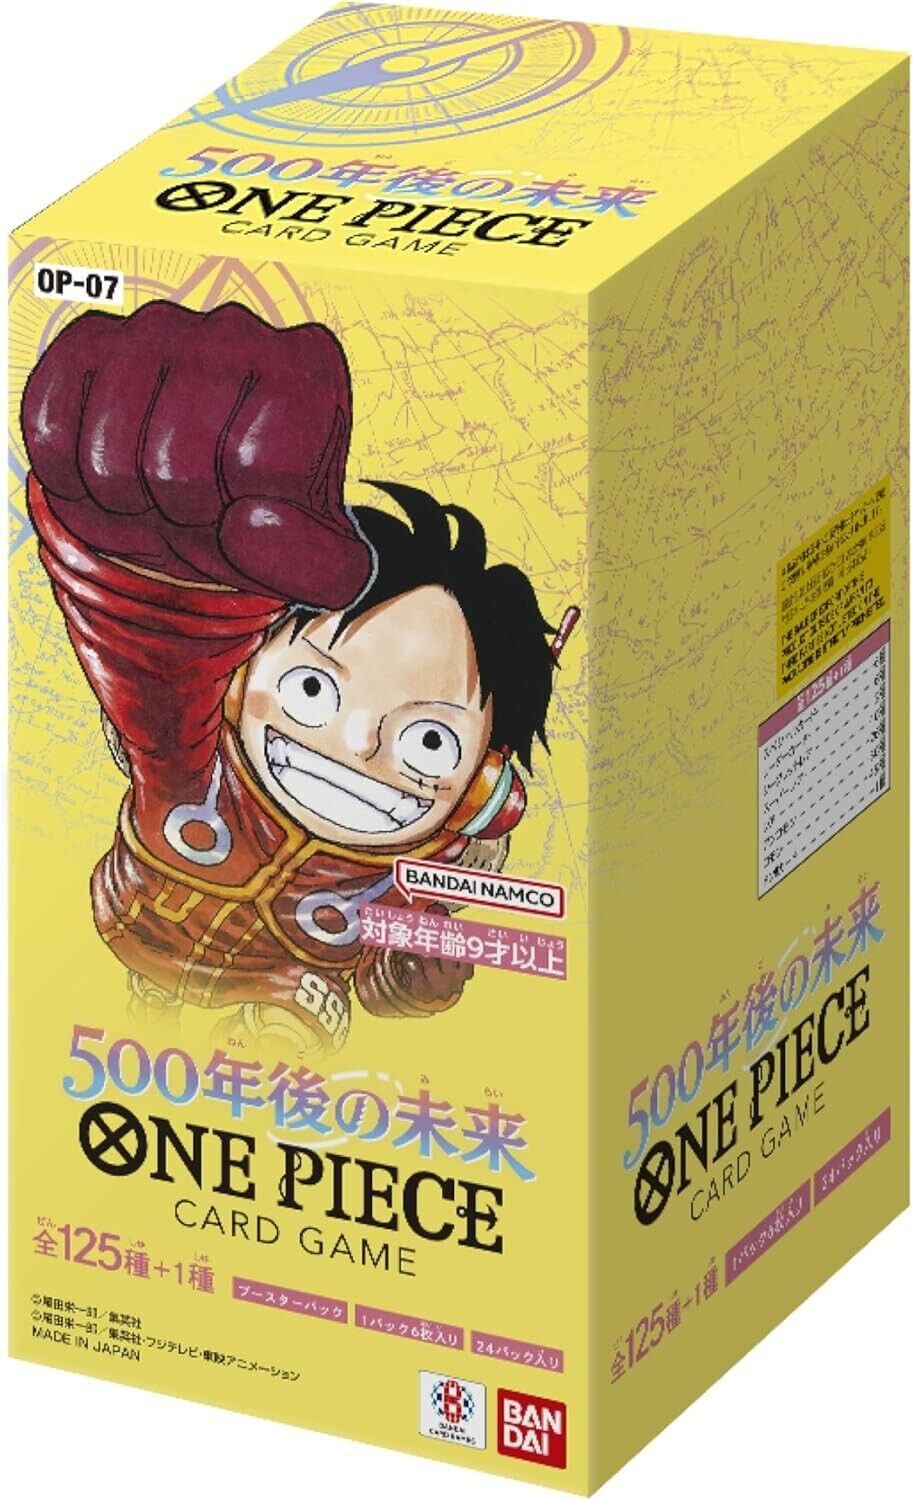 One Piece Card Game [OP-07] Box (Japanese)